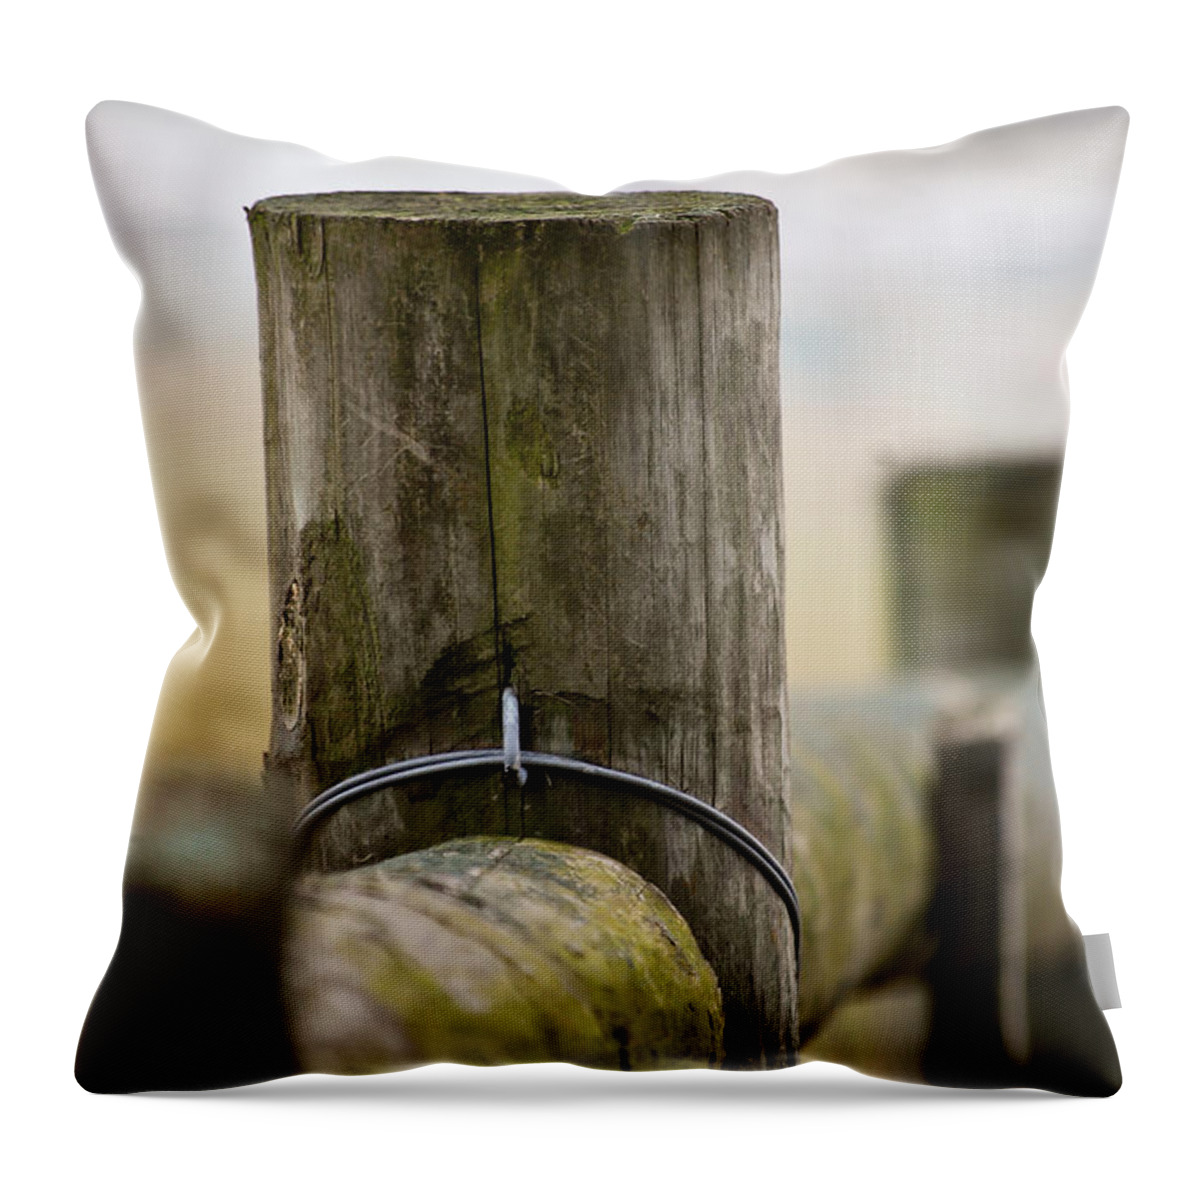 Post Throw Pillow featuring the photograph Fence Post by Kerri Farley